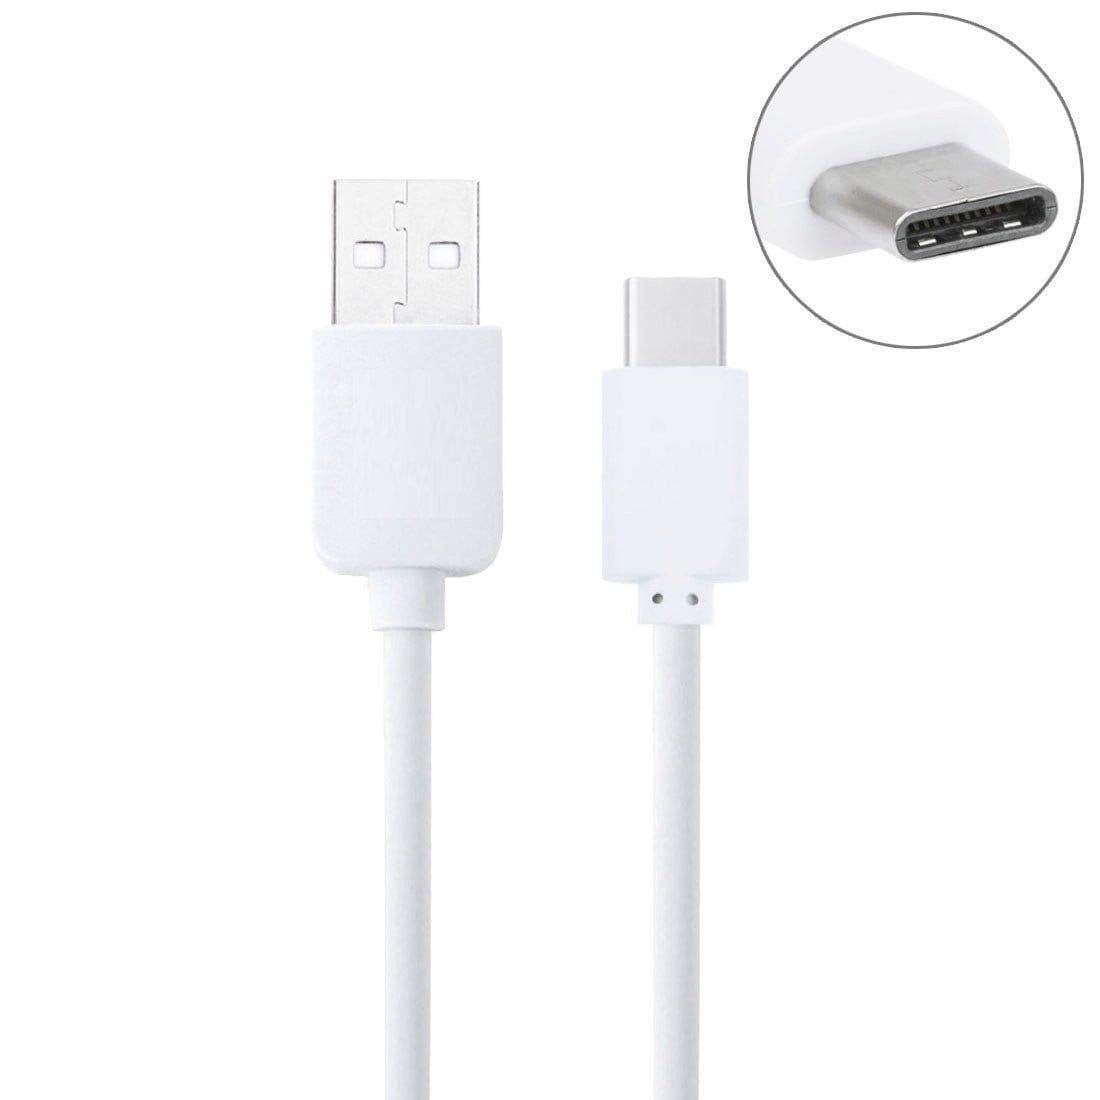 Samsung Galaxy A20e USB to Type C Charging Cable In Car White - 50 CM Short - SmartPhoneGadgetUK